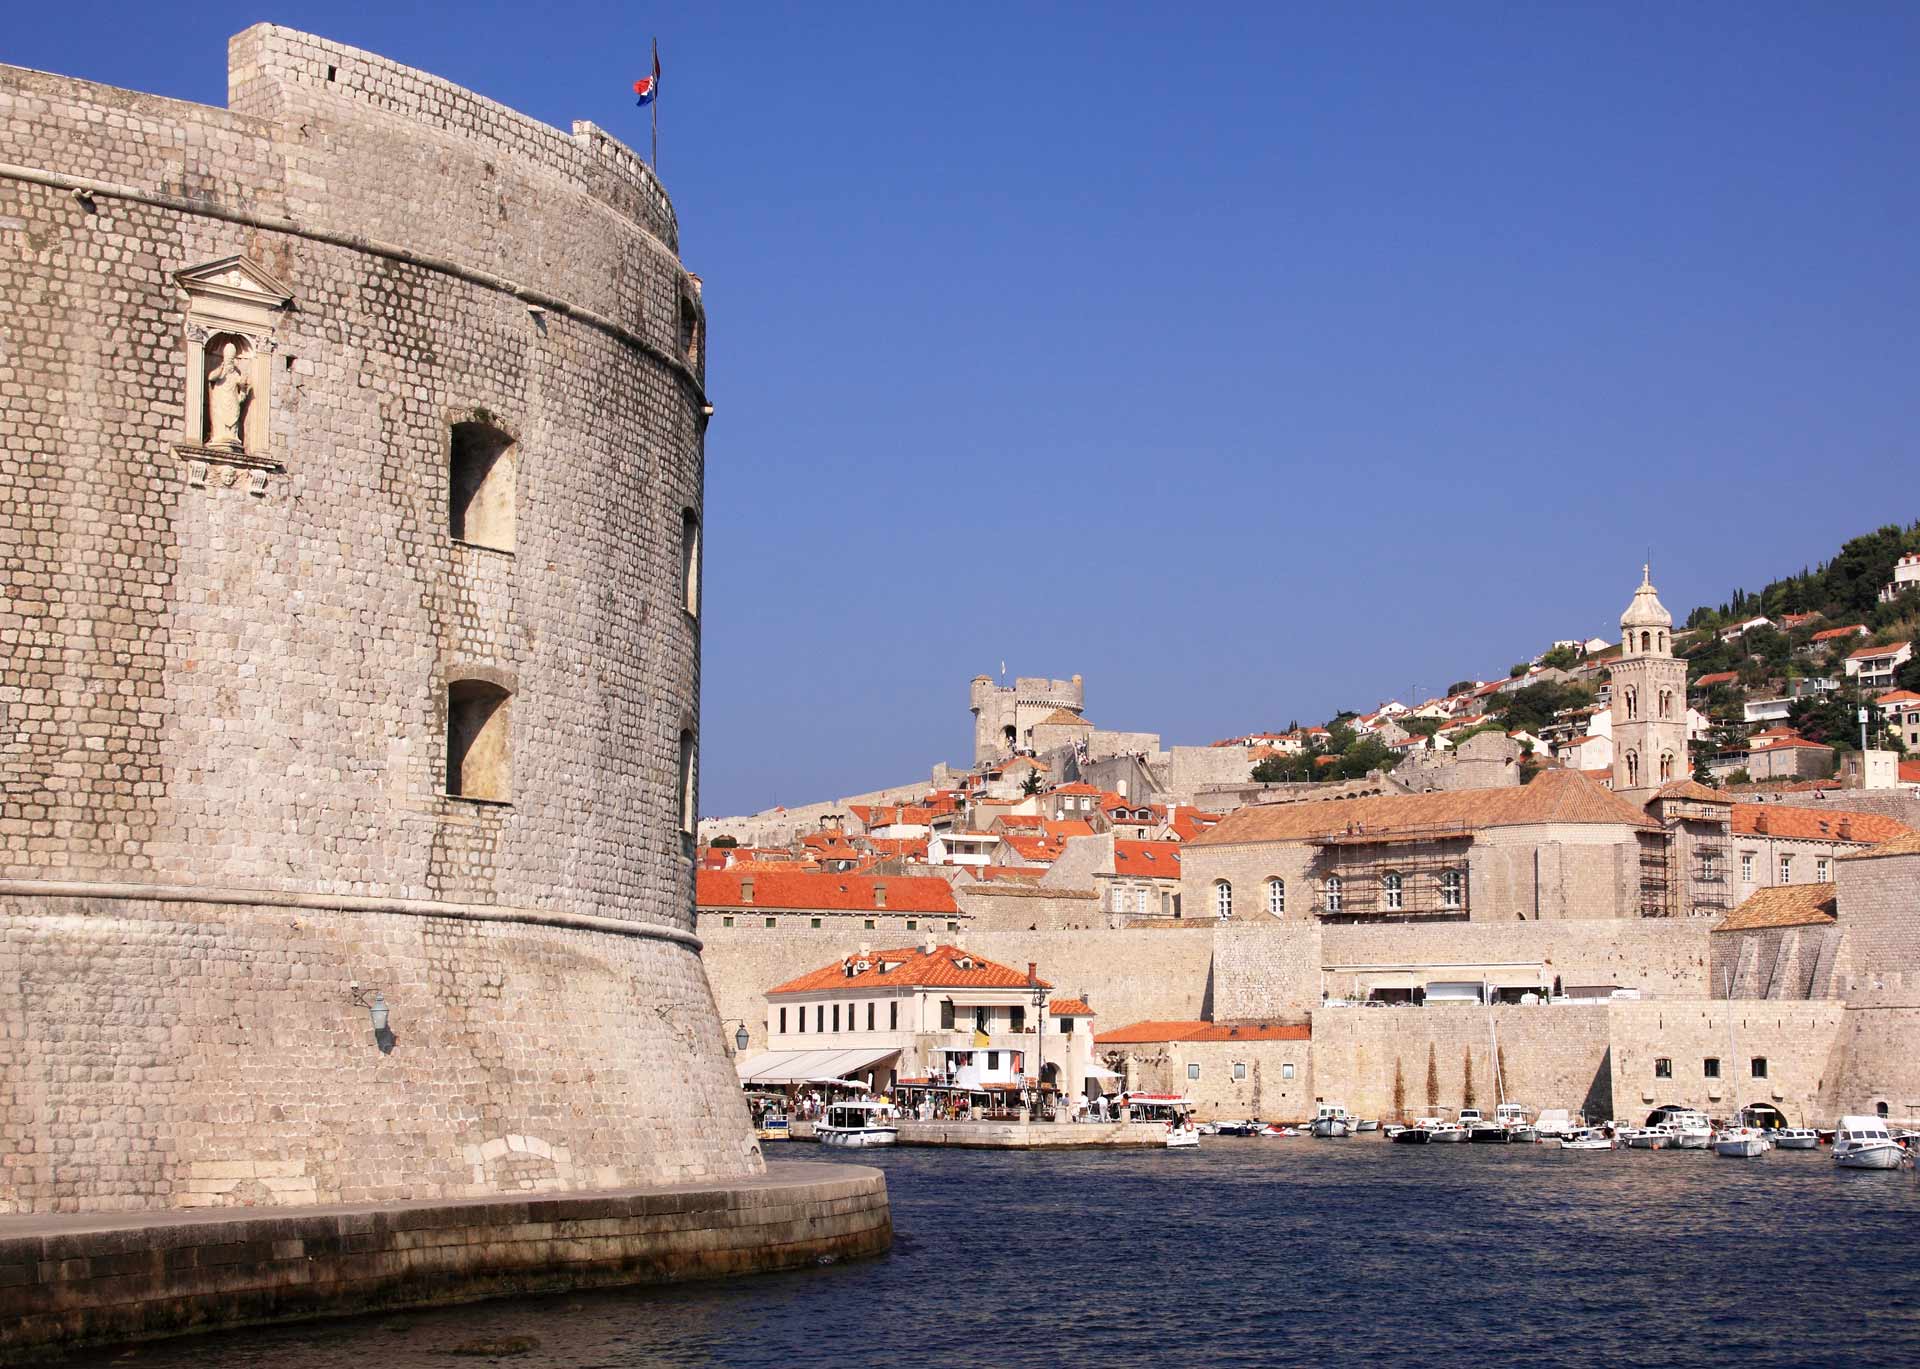 Croatia Dubrovnik Harbor and historical center UNESCO World Heritage Site restored after being damaged by heavy bombardments in the Balkan war